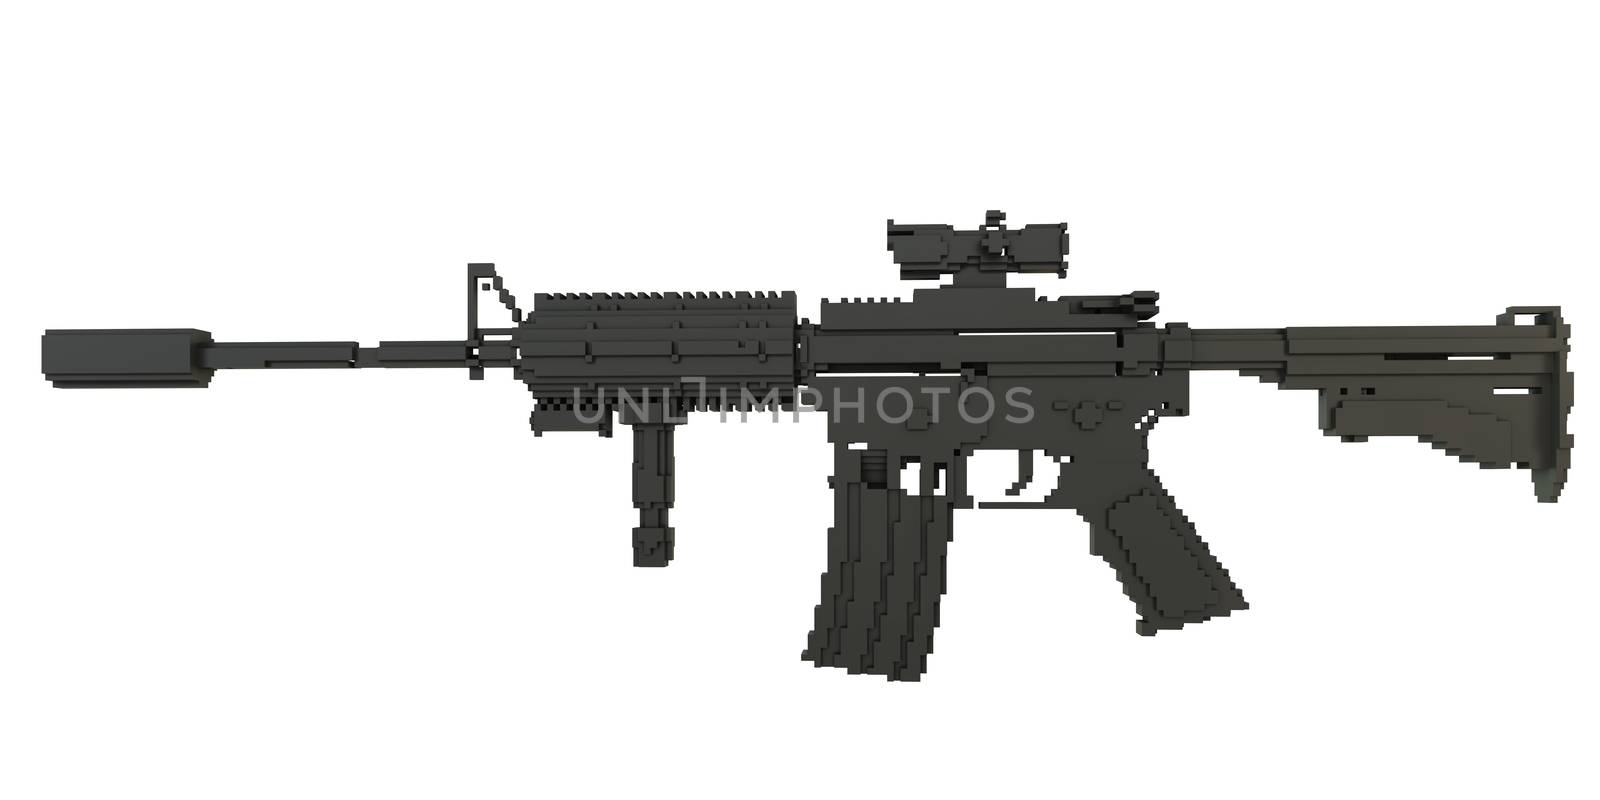 3d printed machine gun isolated on white background. 3D illustration